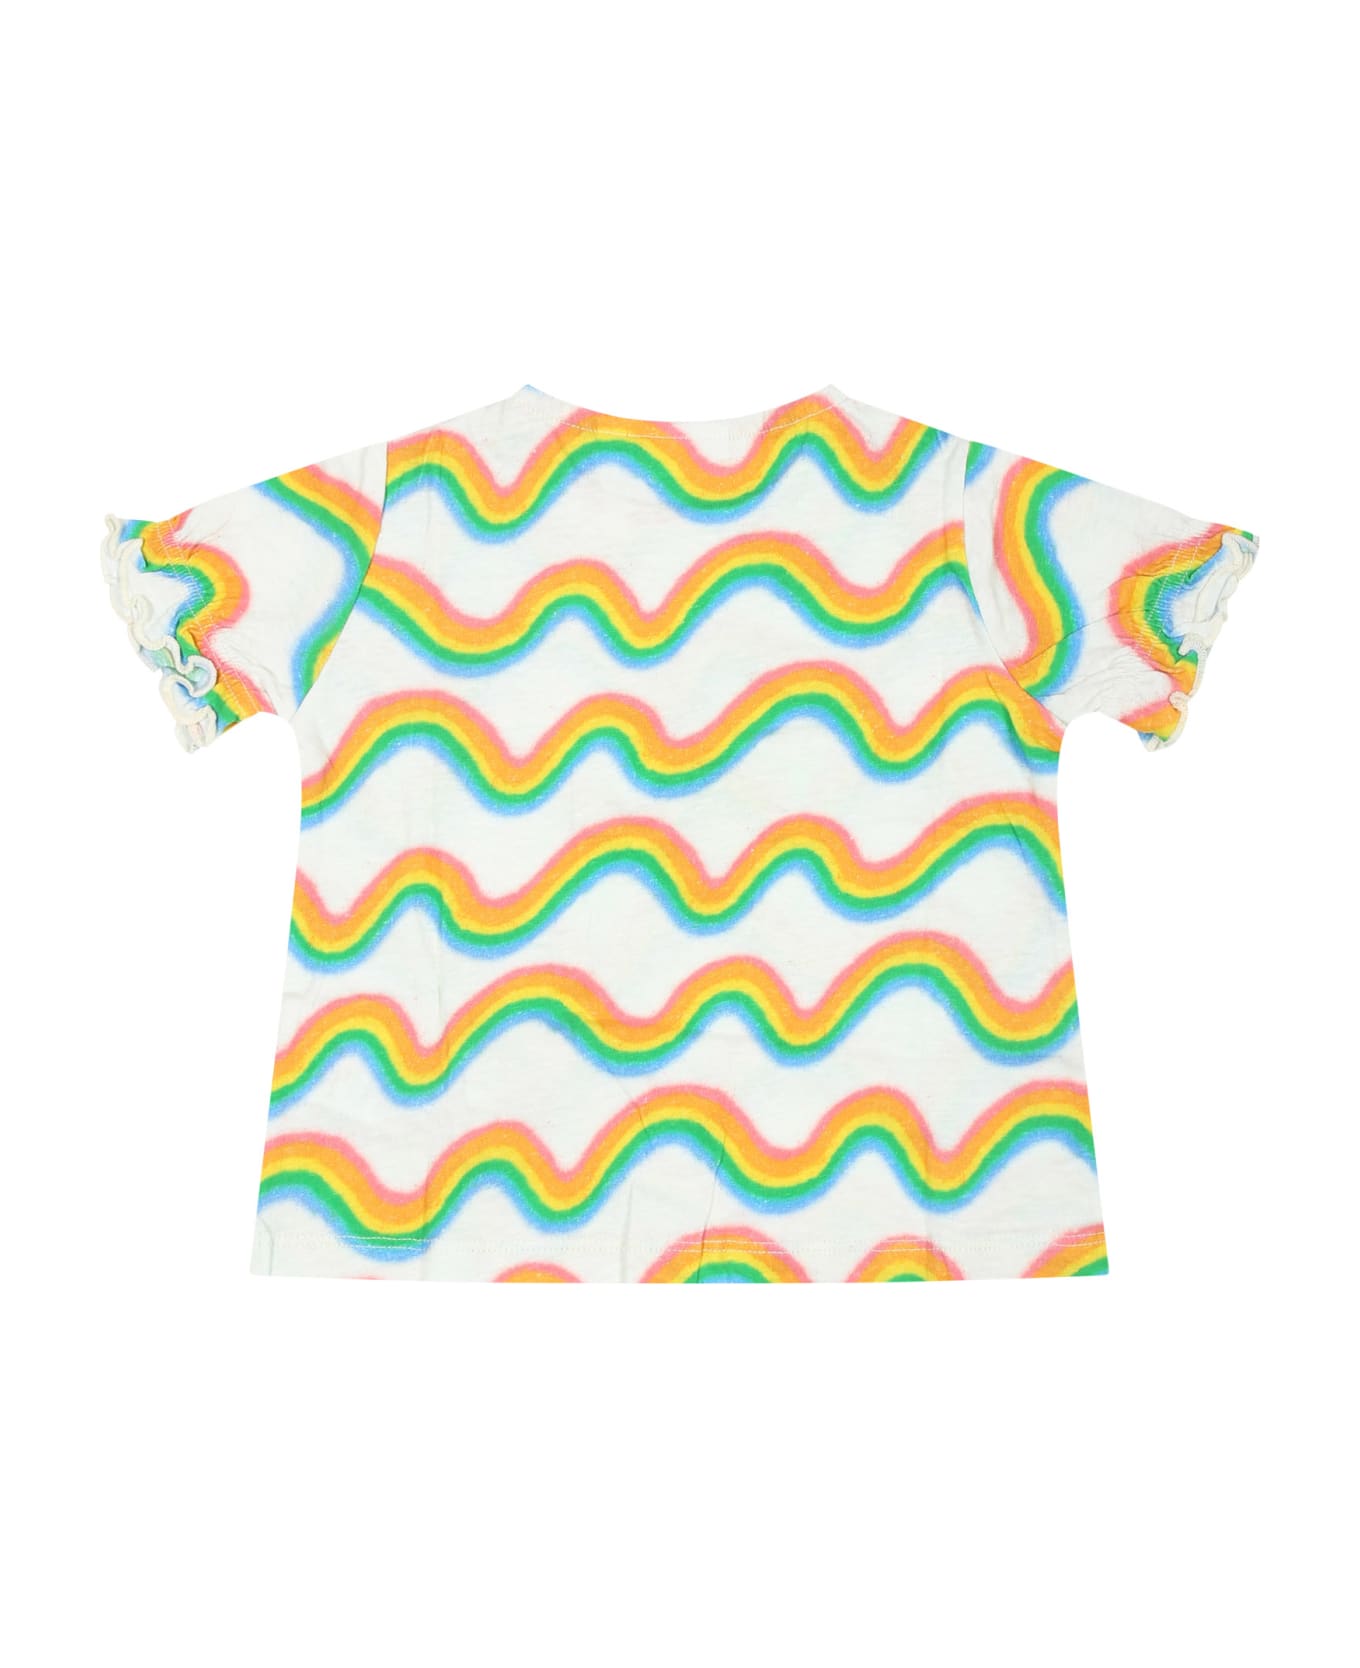 Molo White T-shirt For Baby Girl With Rainbow Print - Multicolor